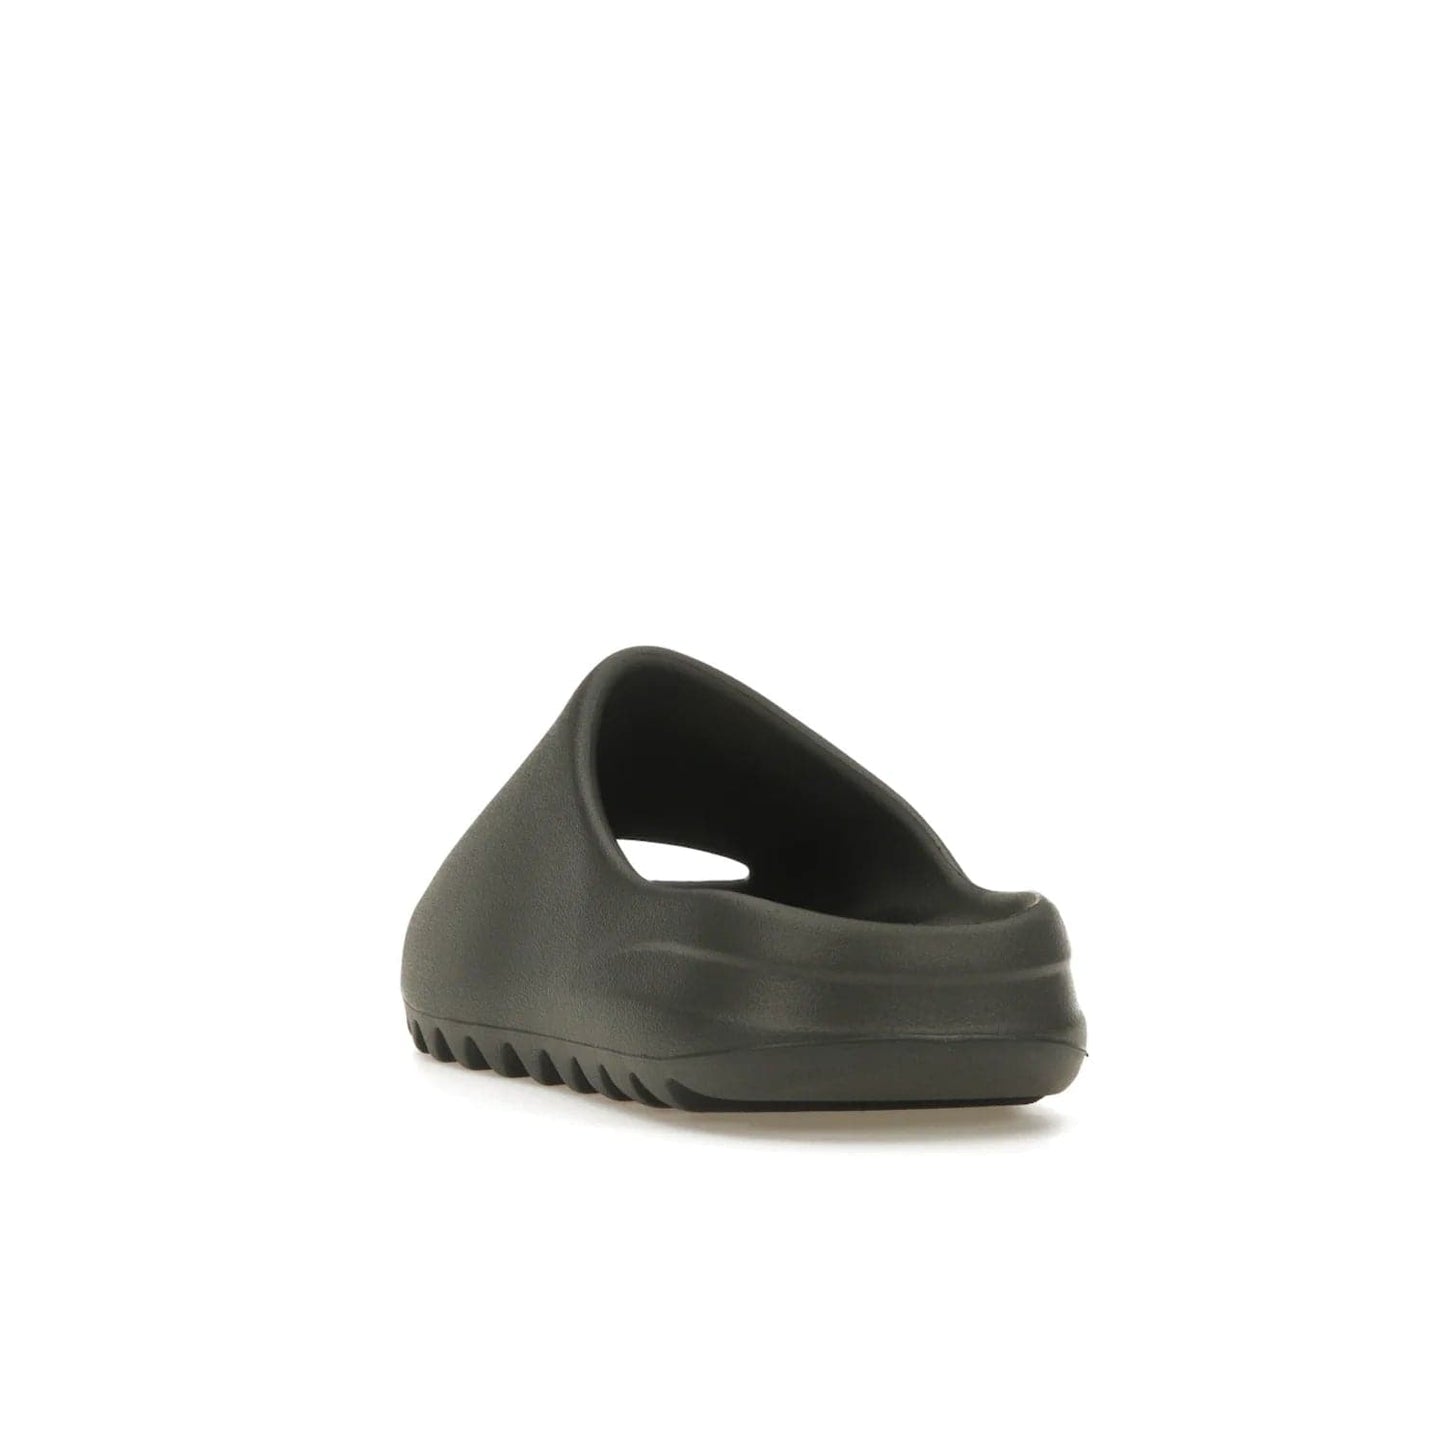 adidas Yeezy Slide Granite - Image 26 - Only at www.BallersClubKickz.com - Introducing the adidas Yeezy Slide Granite with a sleek, soft-to-touch one-piece upper – perfect for making a statement with its minimalistic design and luxurious comfort. Get yours now for only $70.